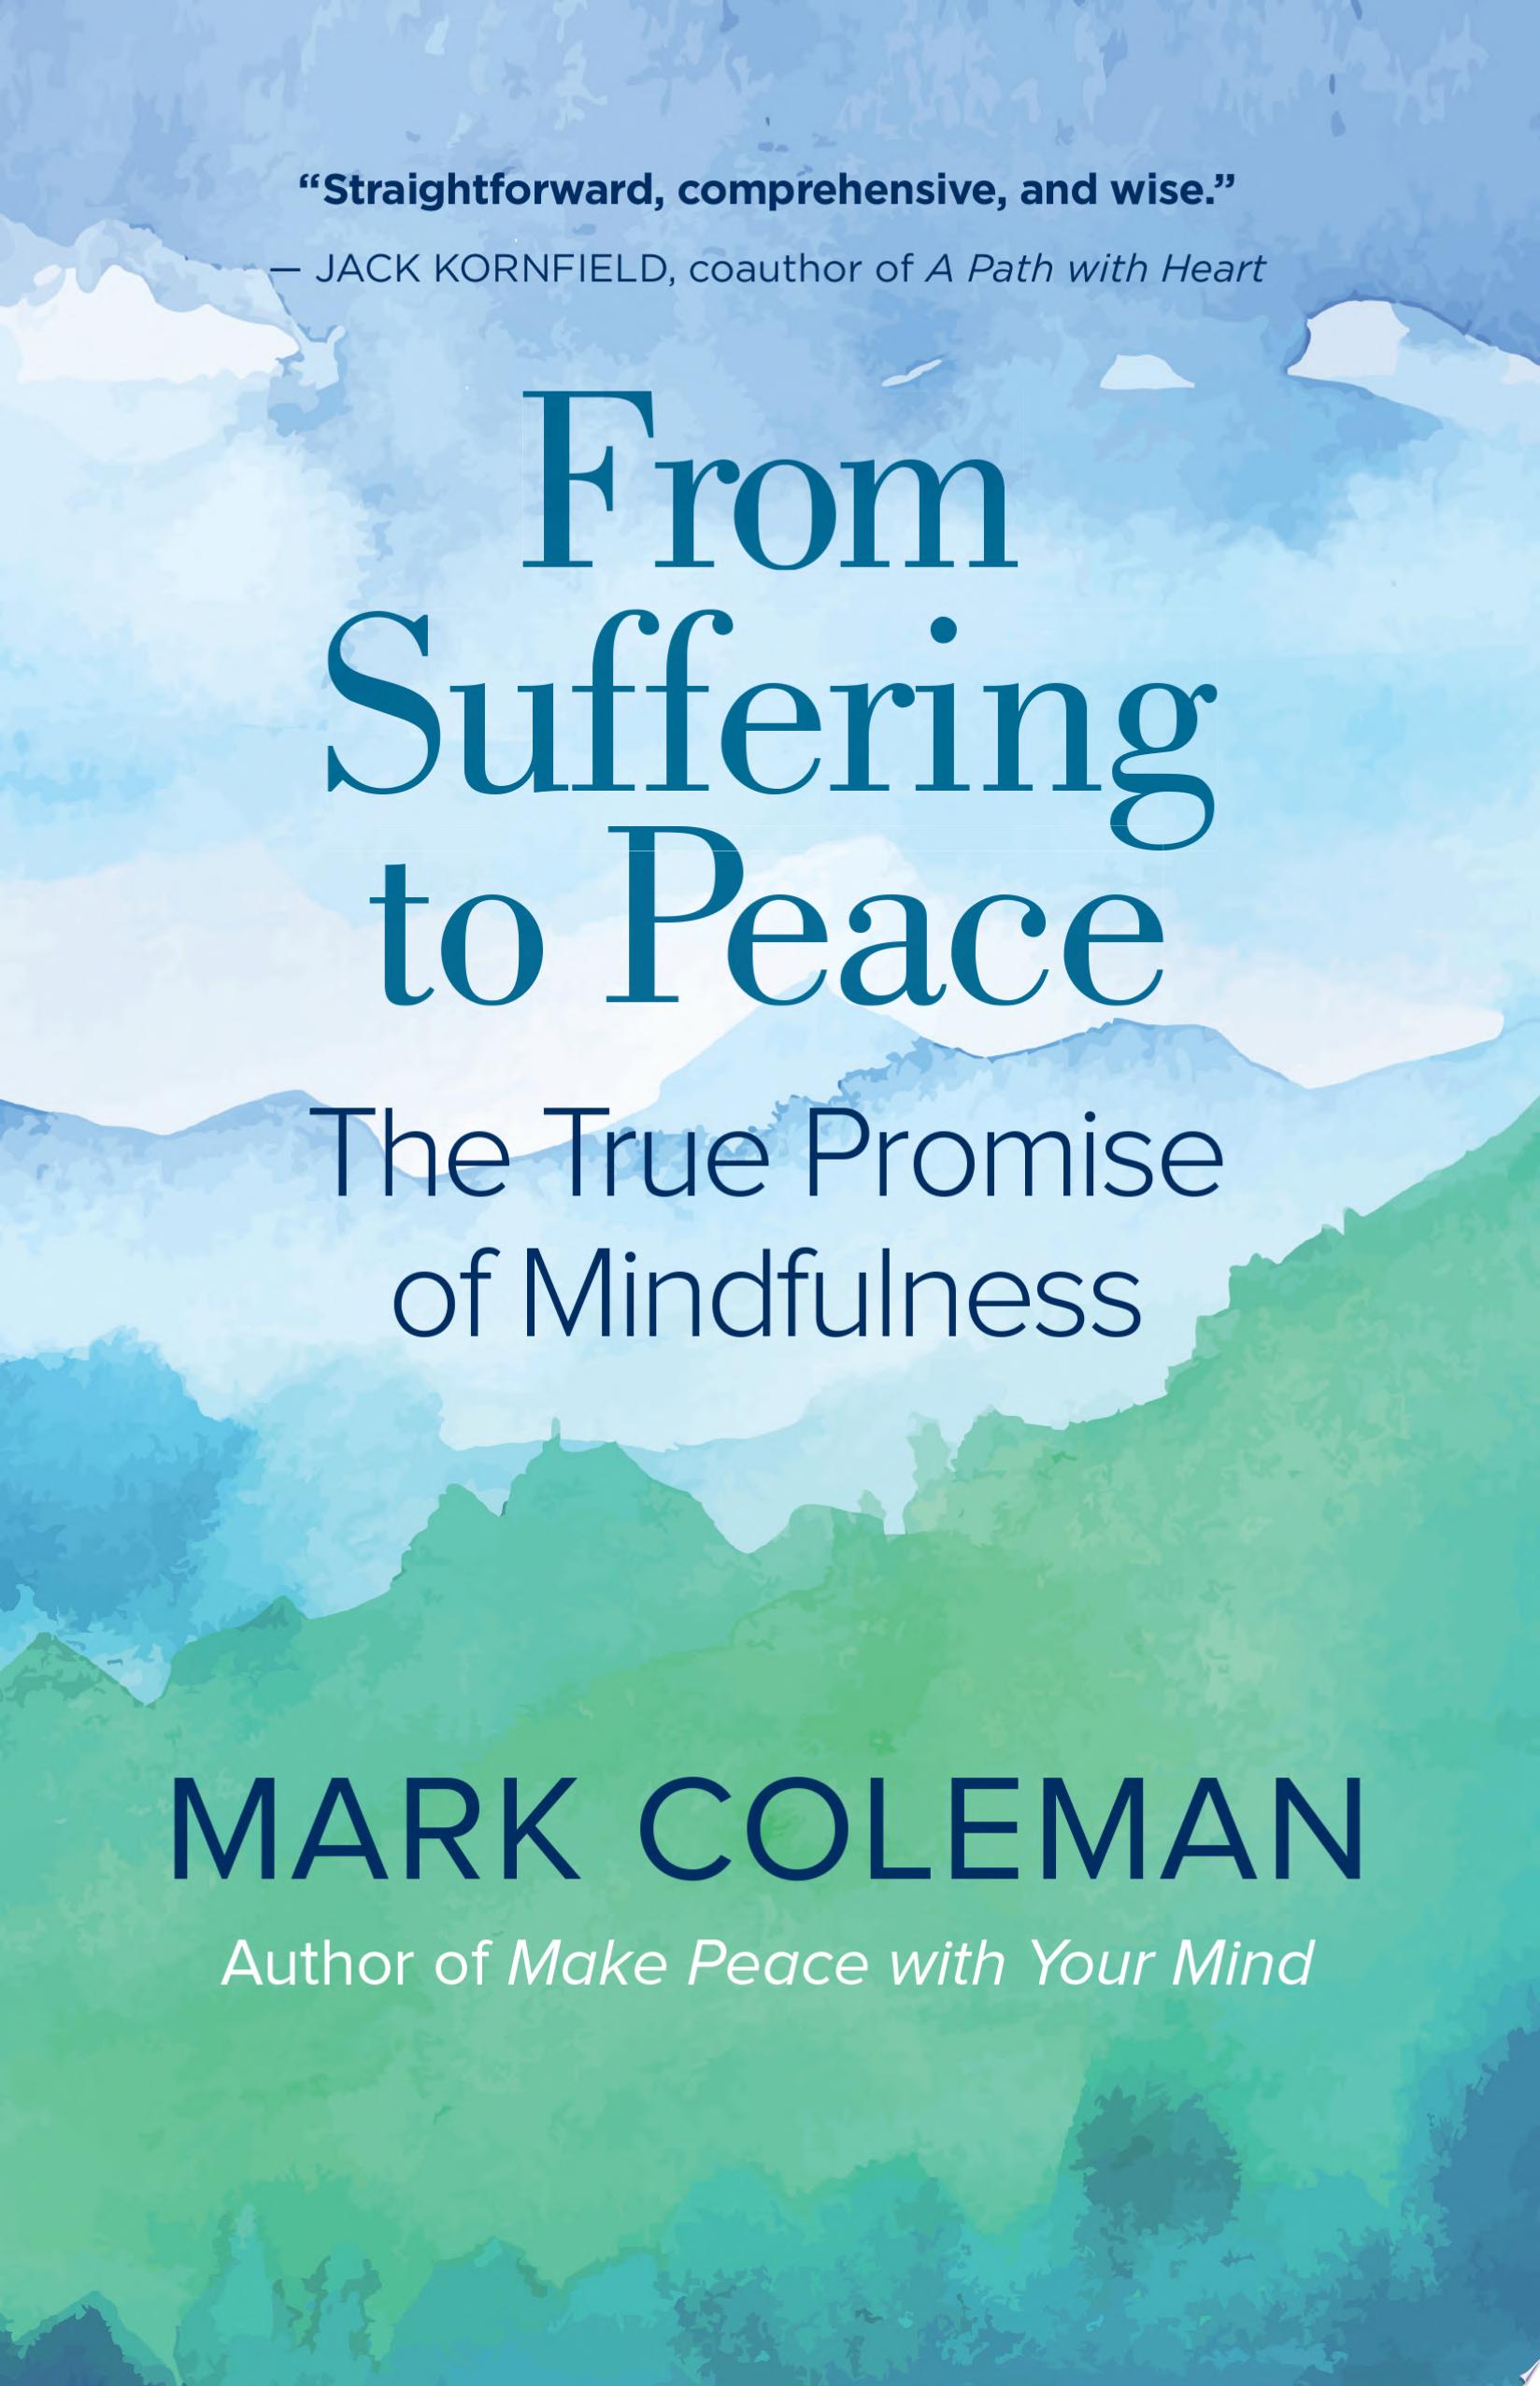 Image for "From Suffering to Peace"